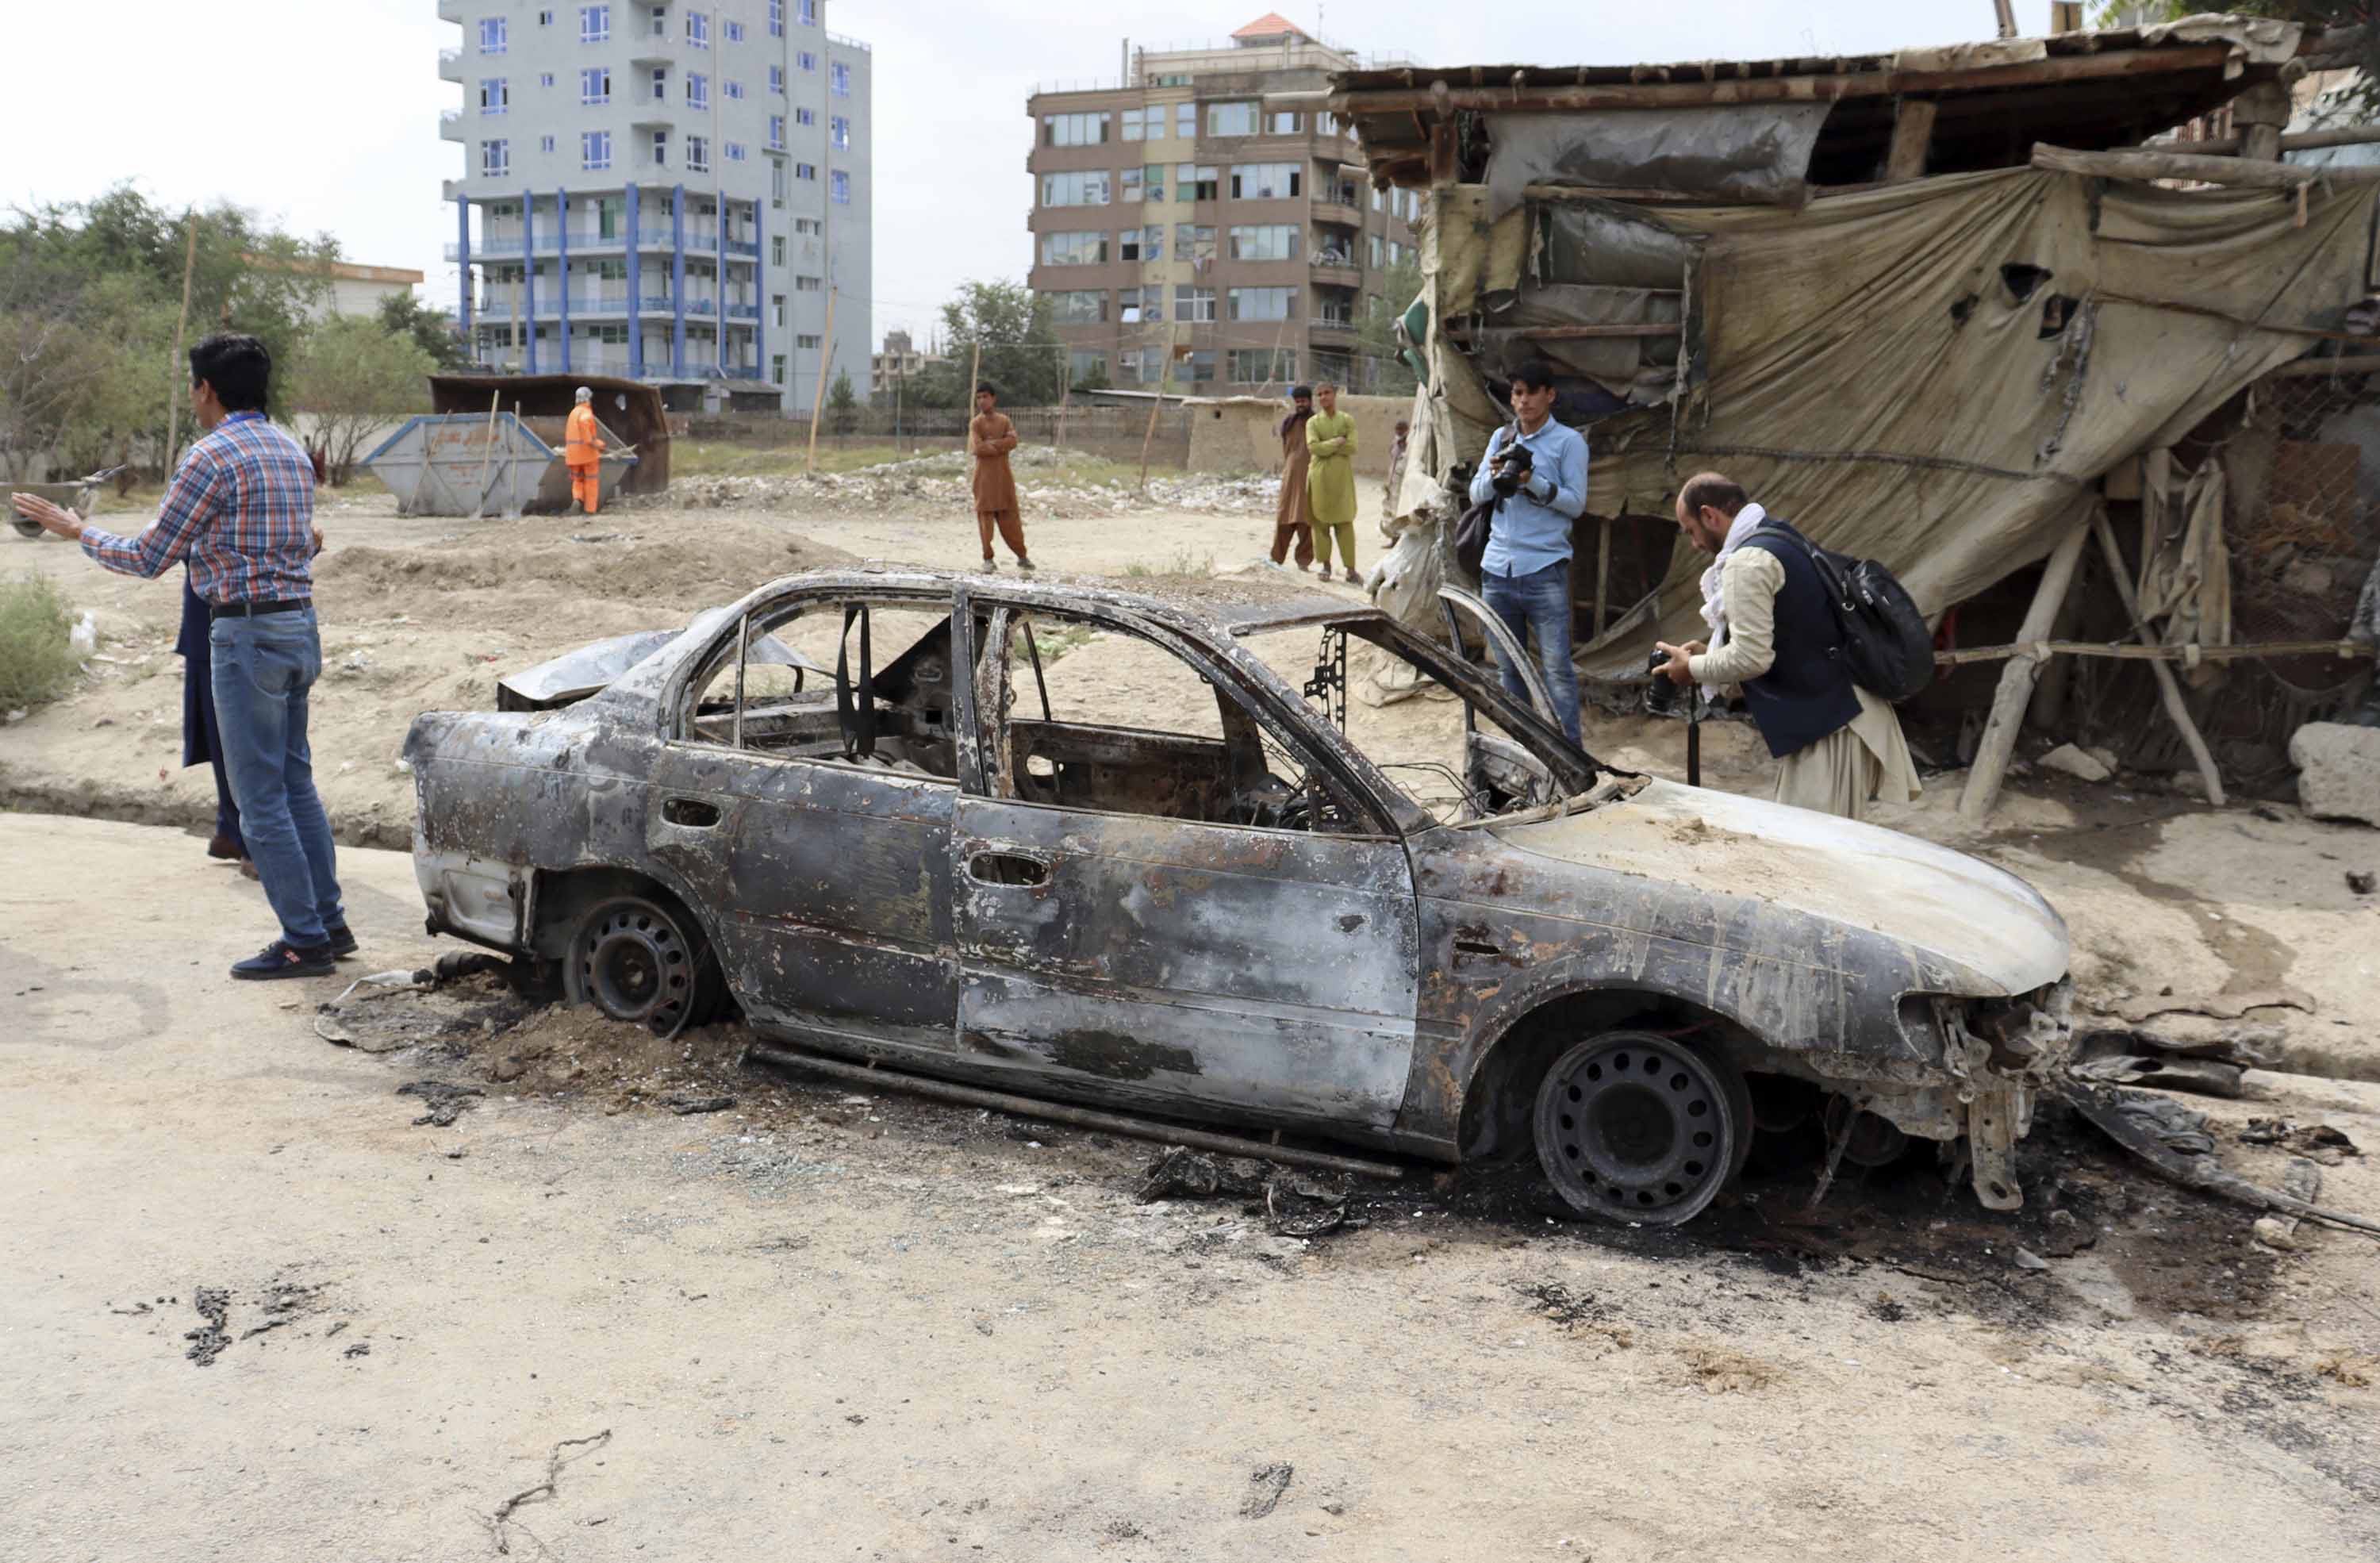 Journalists take photos of a destroyed vehicle where rockets were fired from, in Kabul, Afghanistan, on Monday, August 30. 